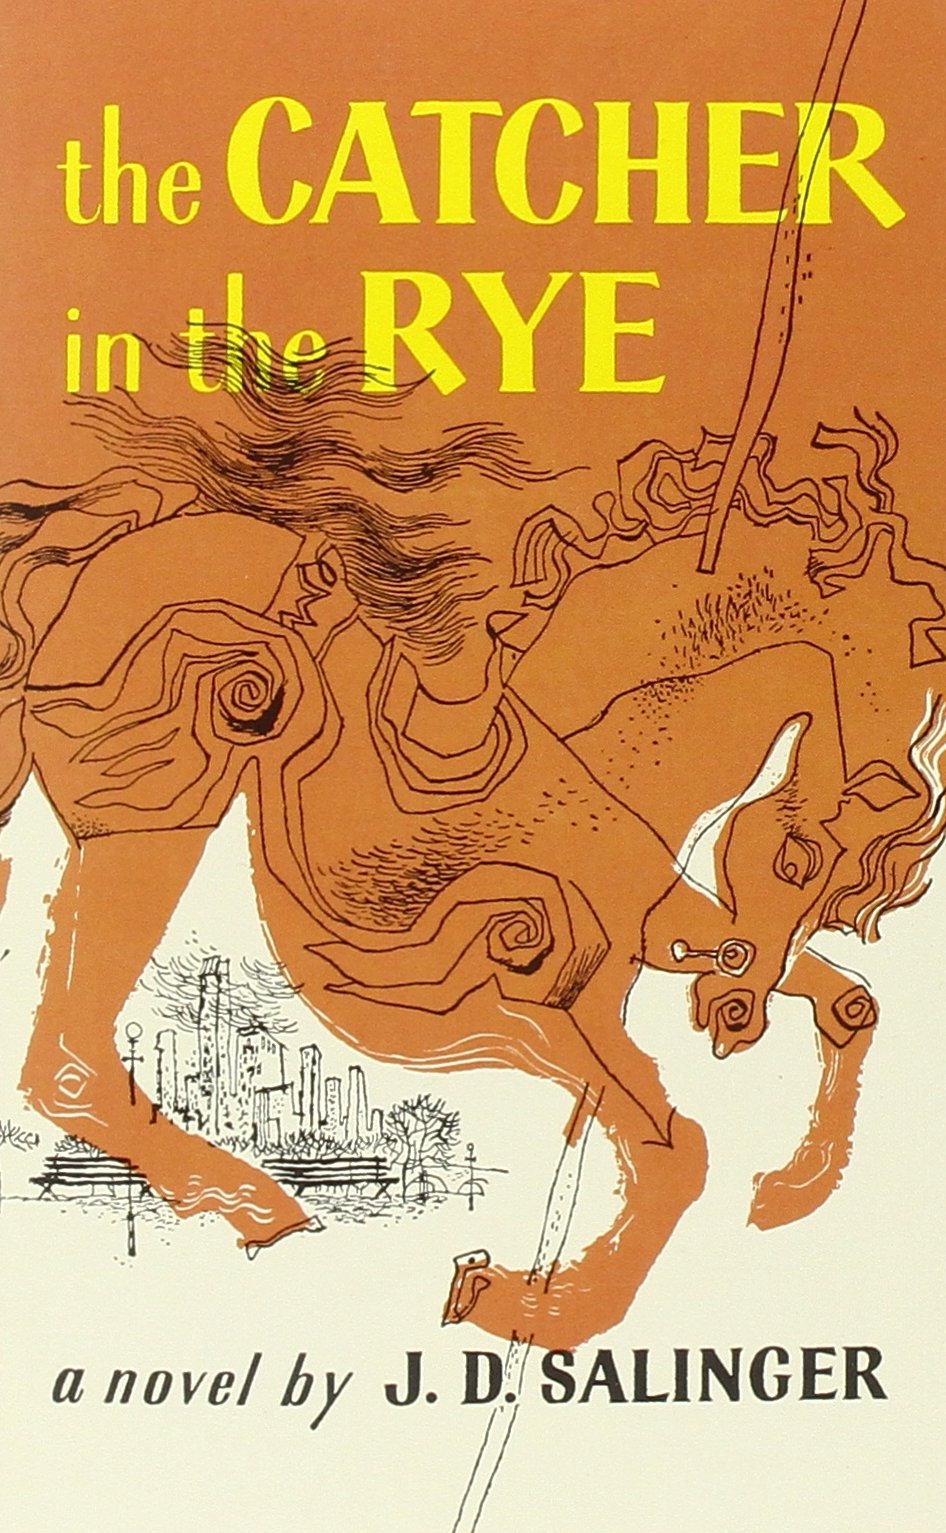 catcher in the rye book cover